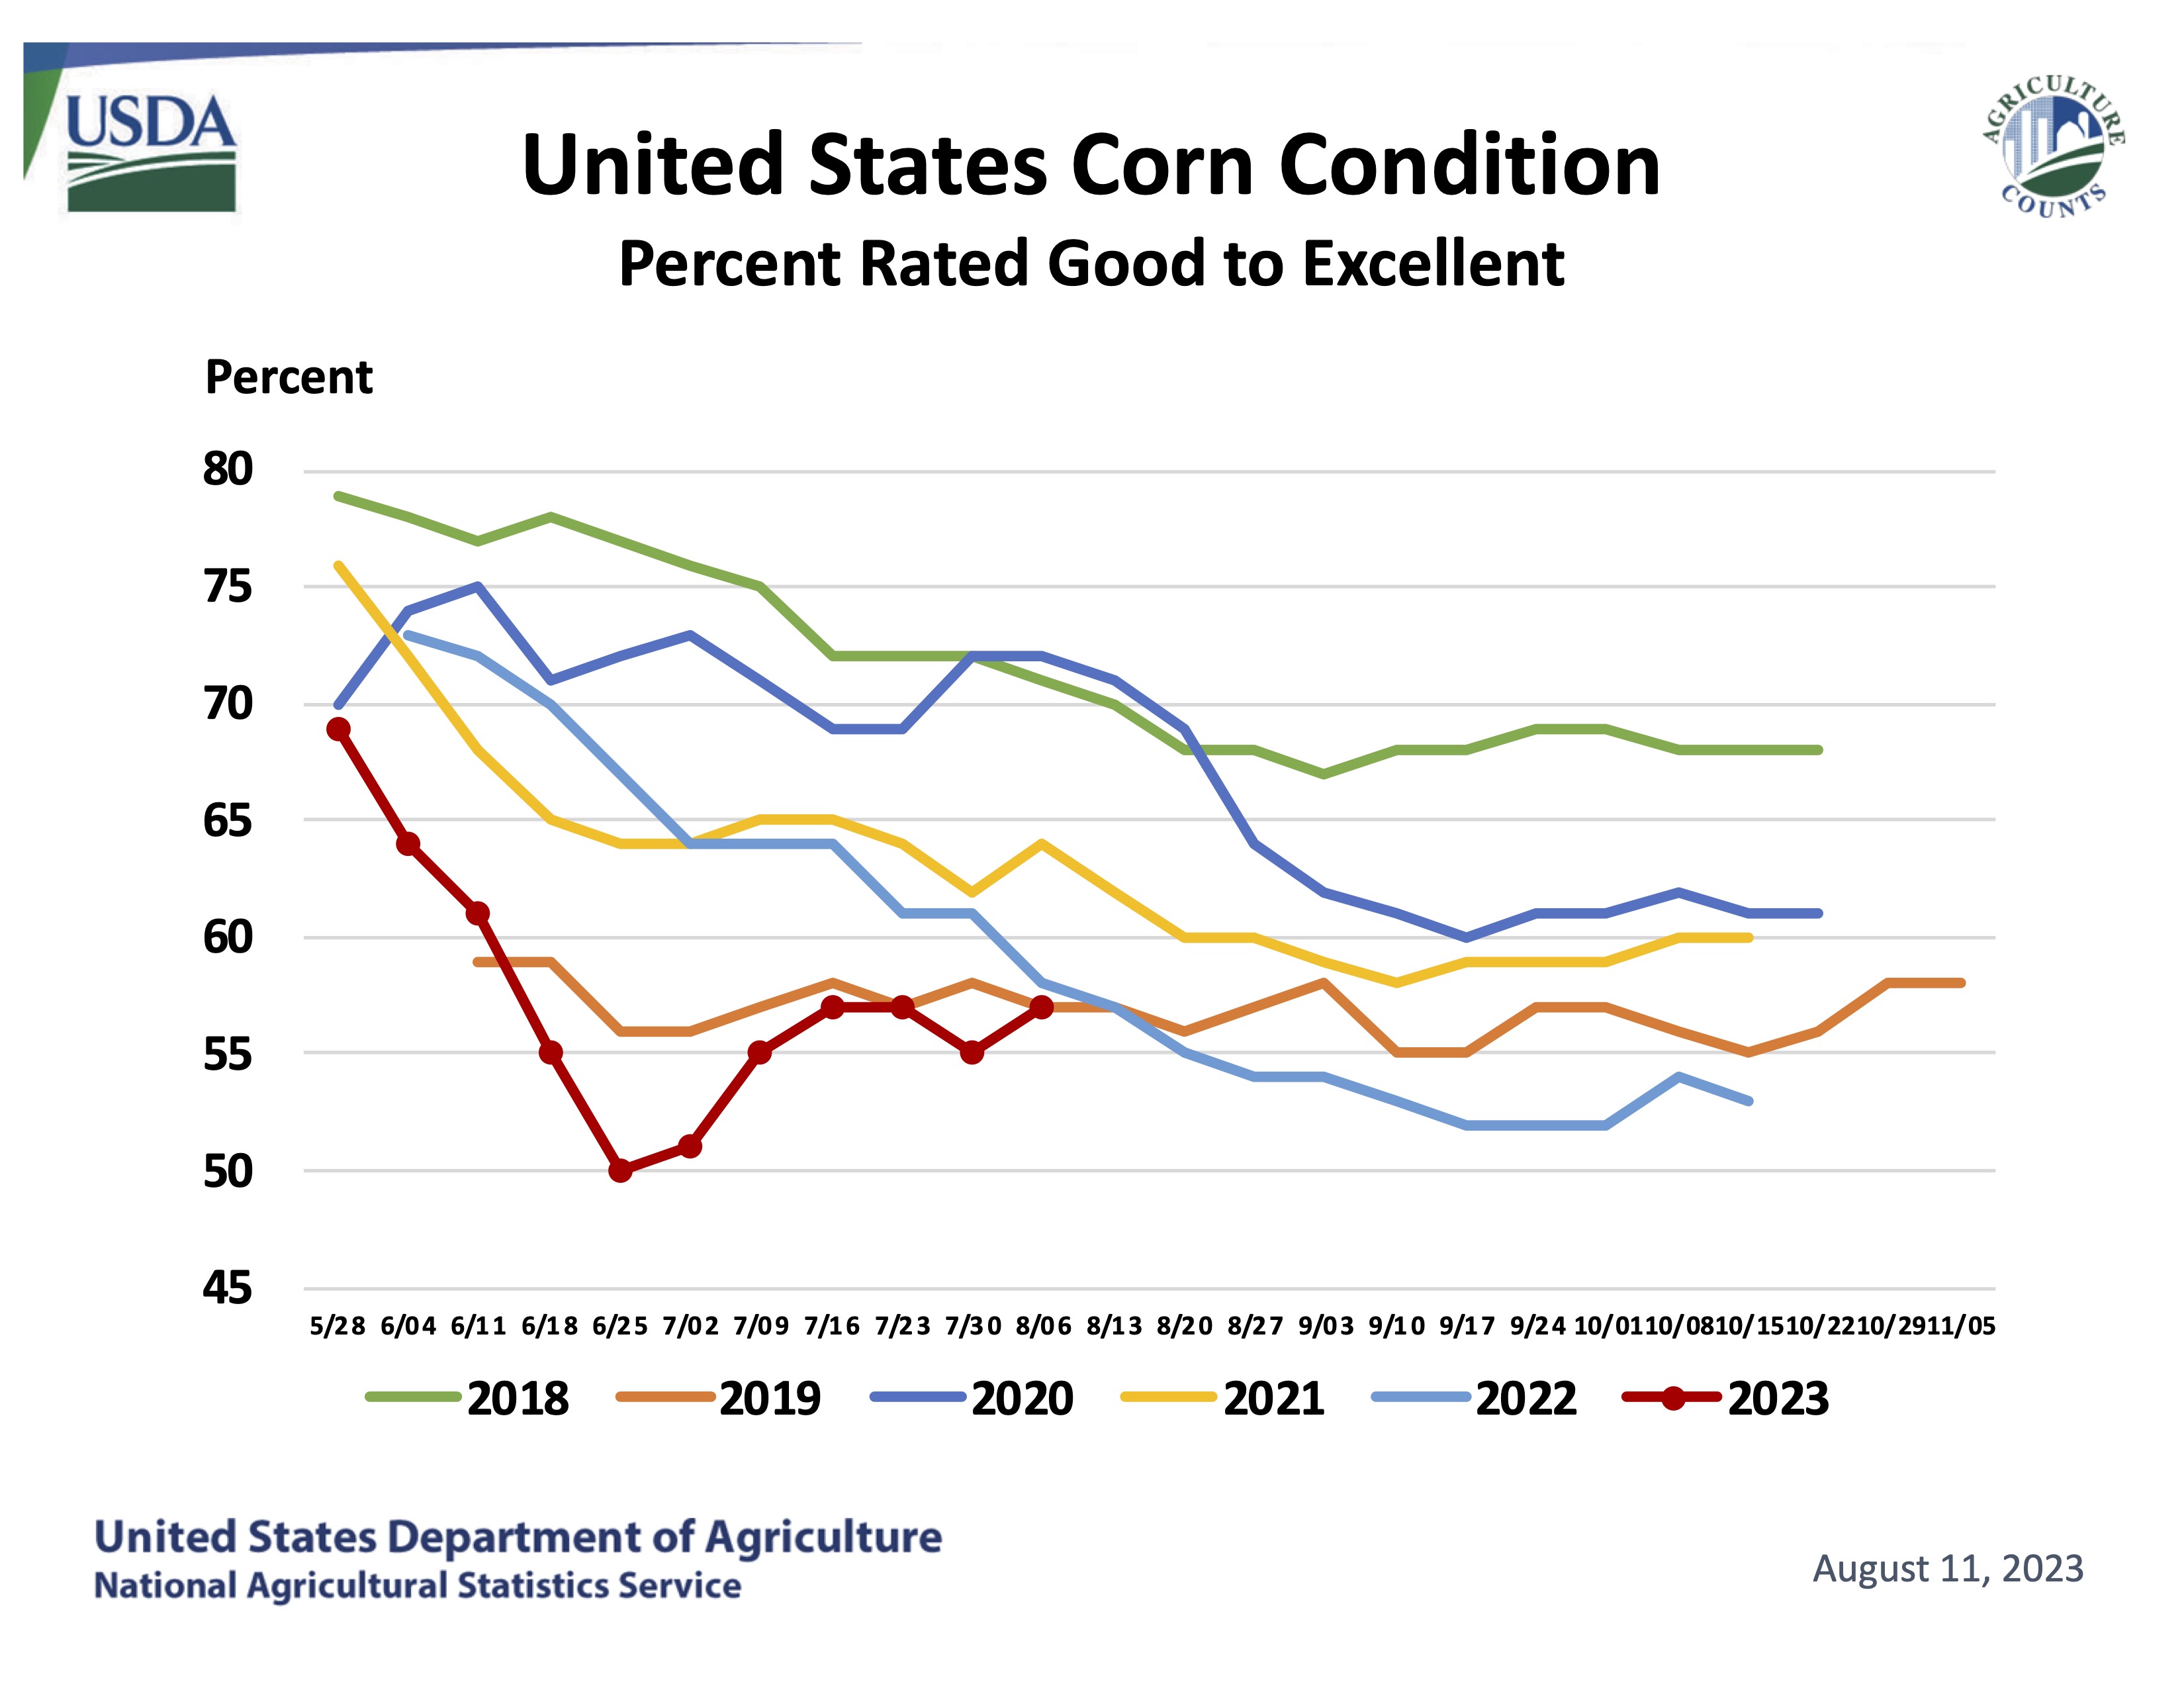 Chart indicating condition of U.S. corn crop